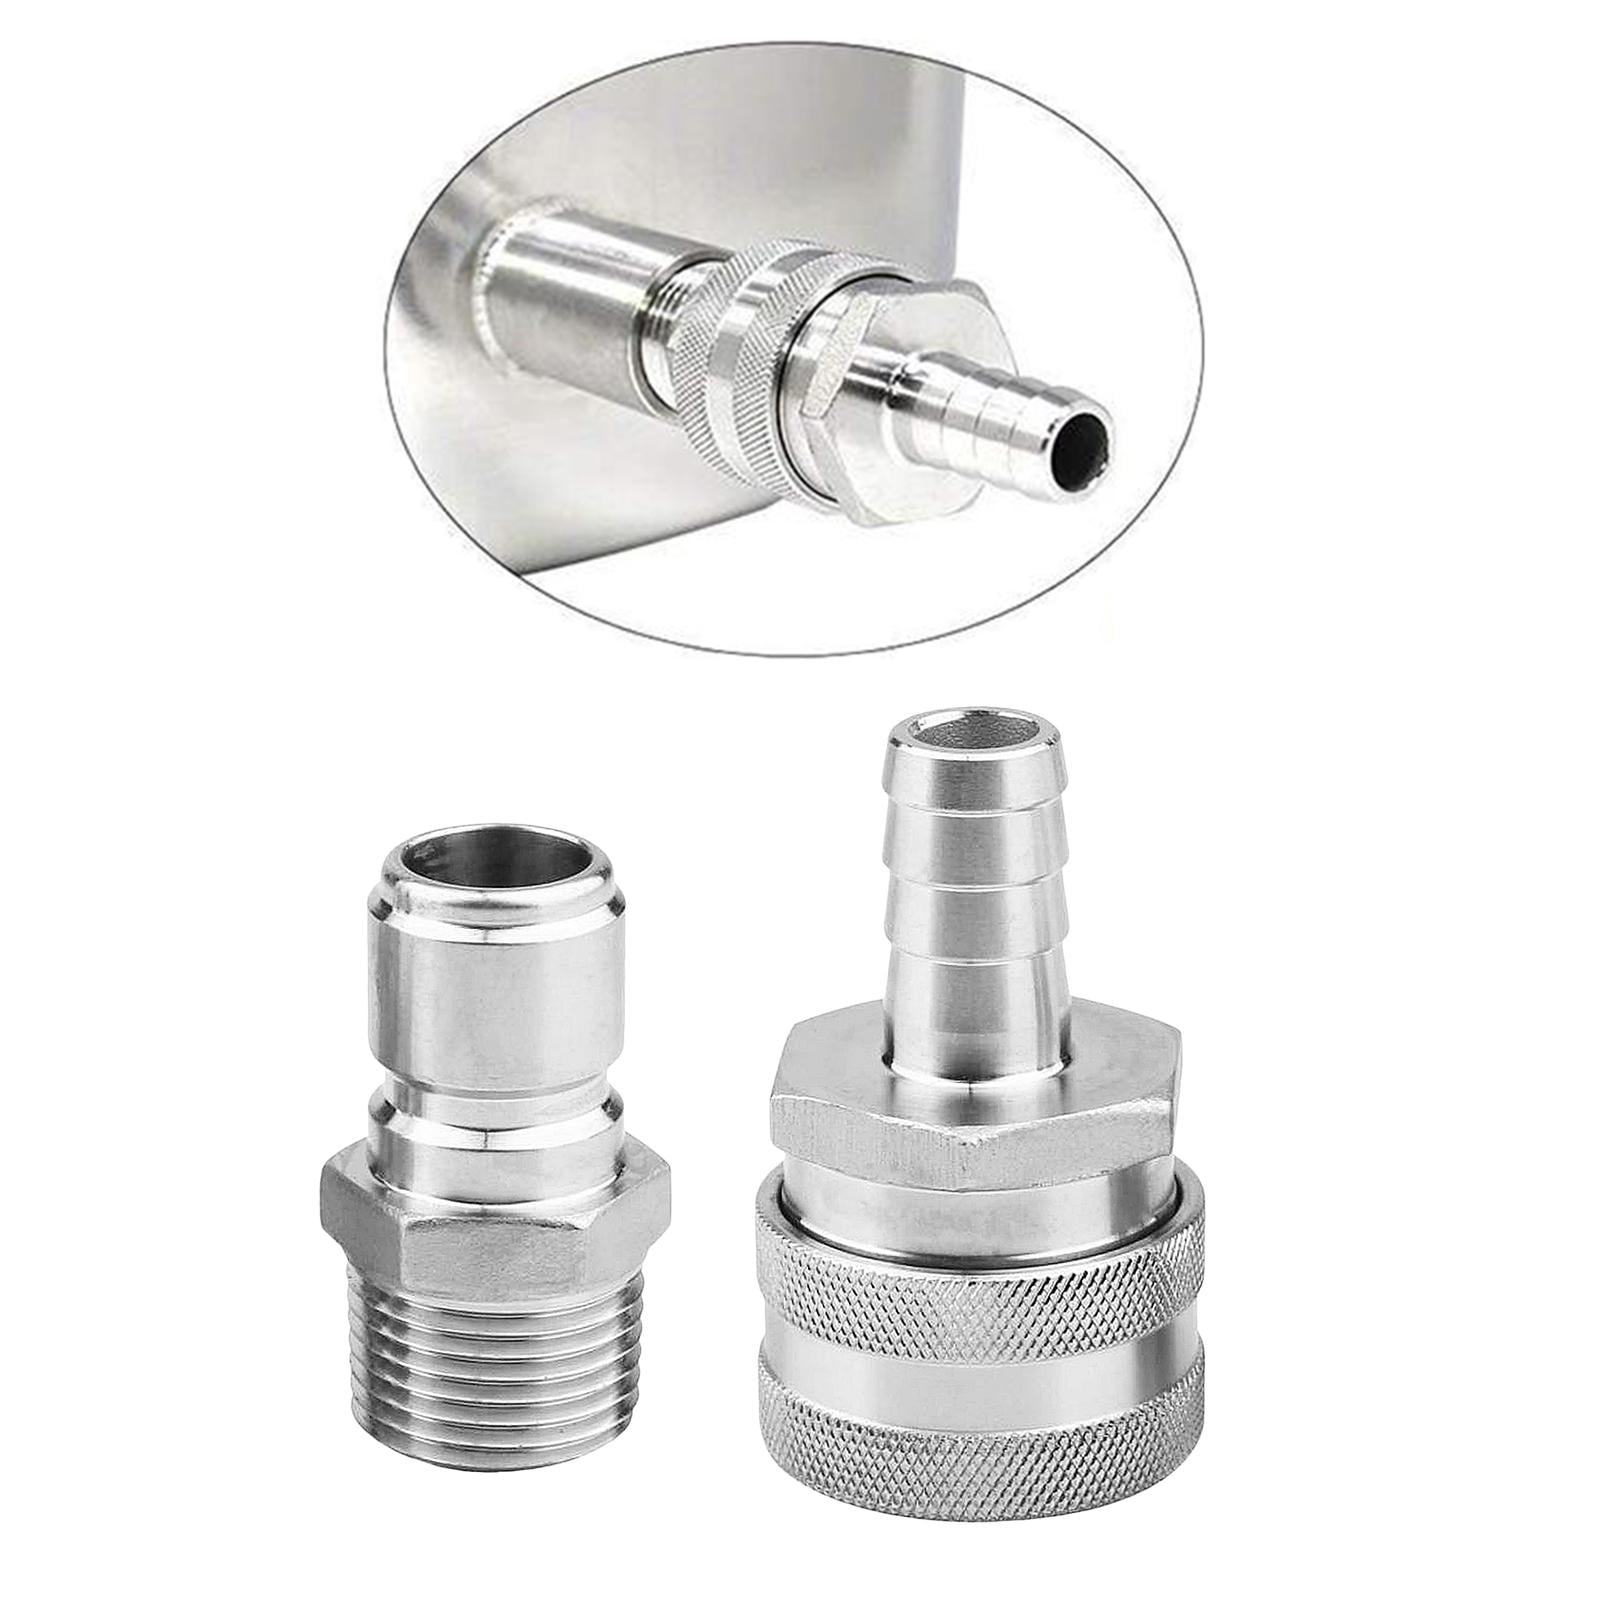 Fenteer Stainless Steel 1/2 MPT Male Barb Female Quick Disconnect Set Homebrew Fittings Beer Equipment Replacement 